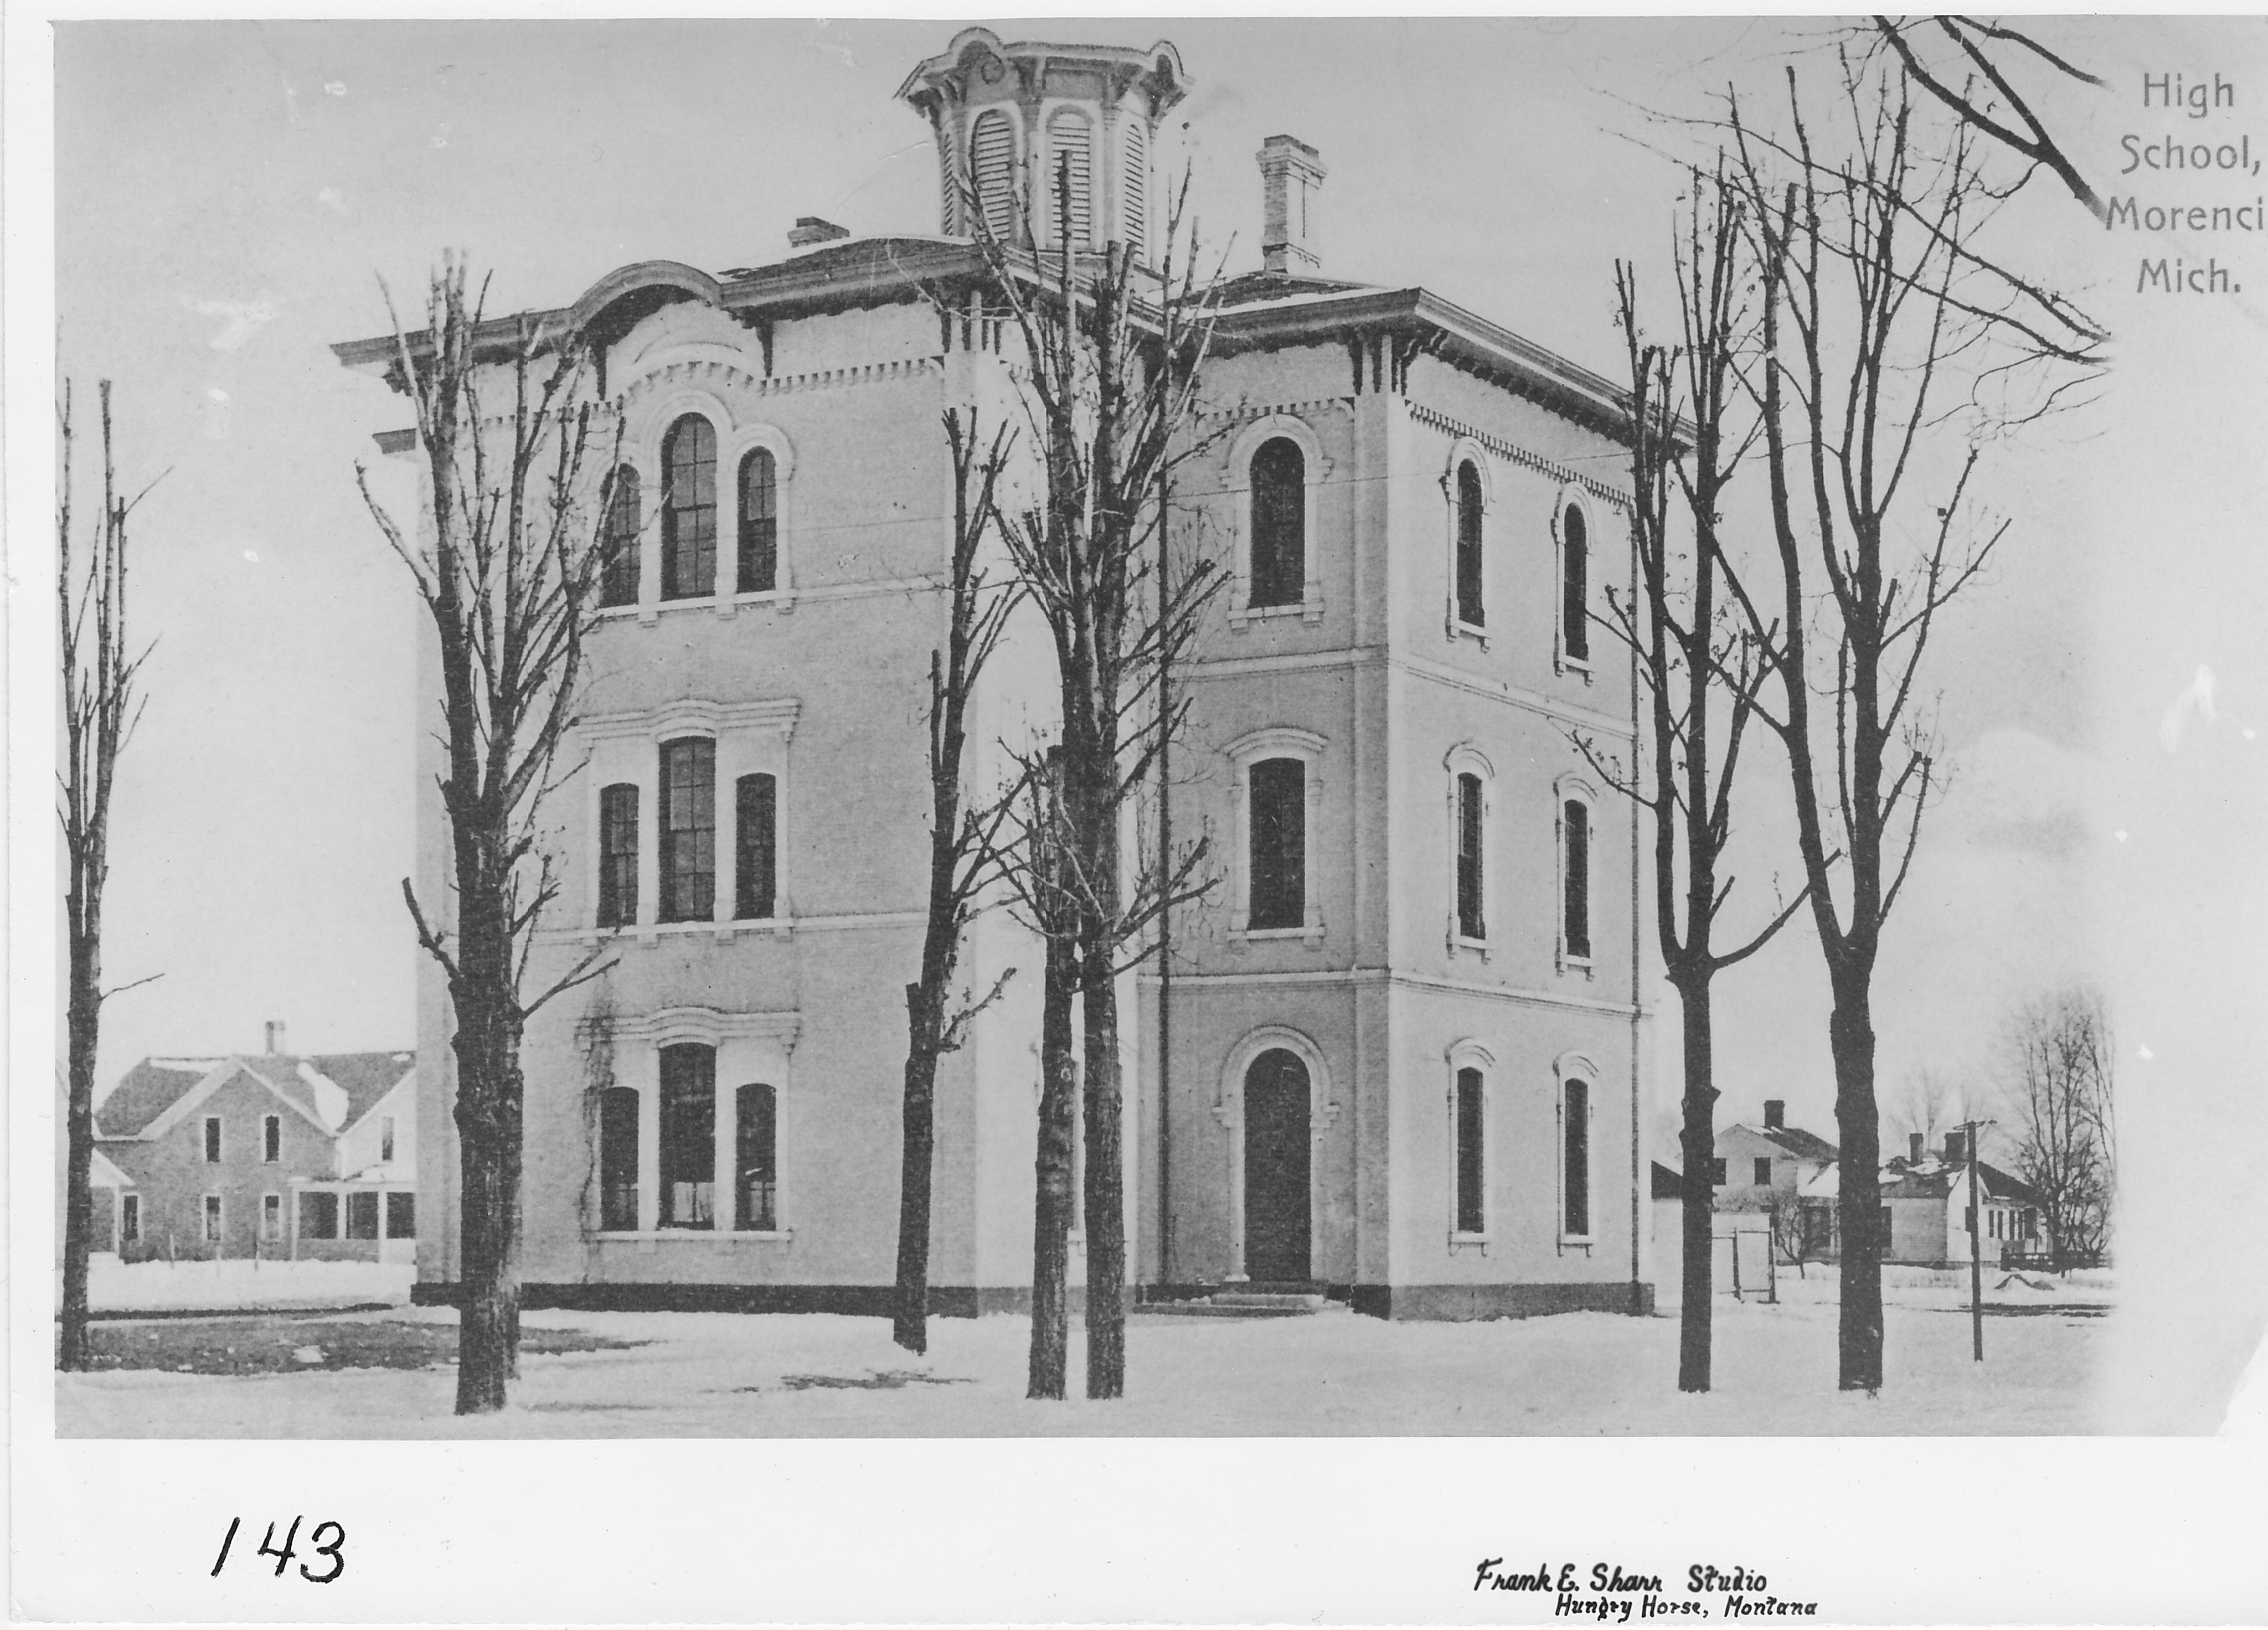 High school building on N. Summit Street.  Built on the “Commons” in 1872, demolished in 1907.  Built by James Turner and Albert Deyo at a cost of $13,000.